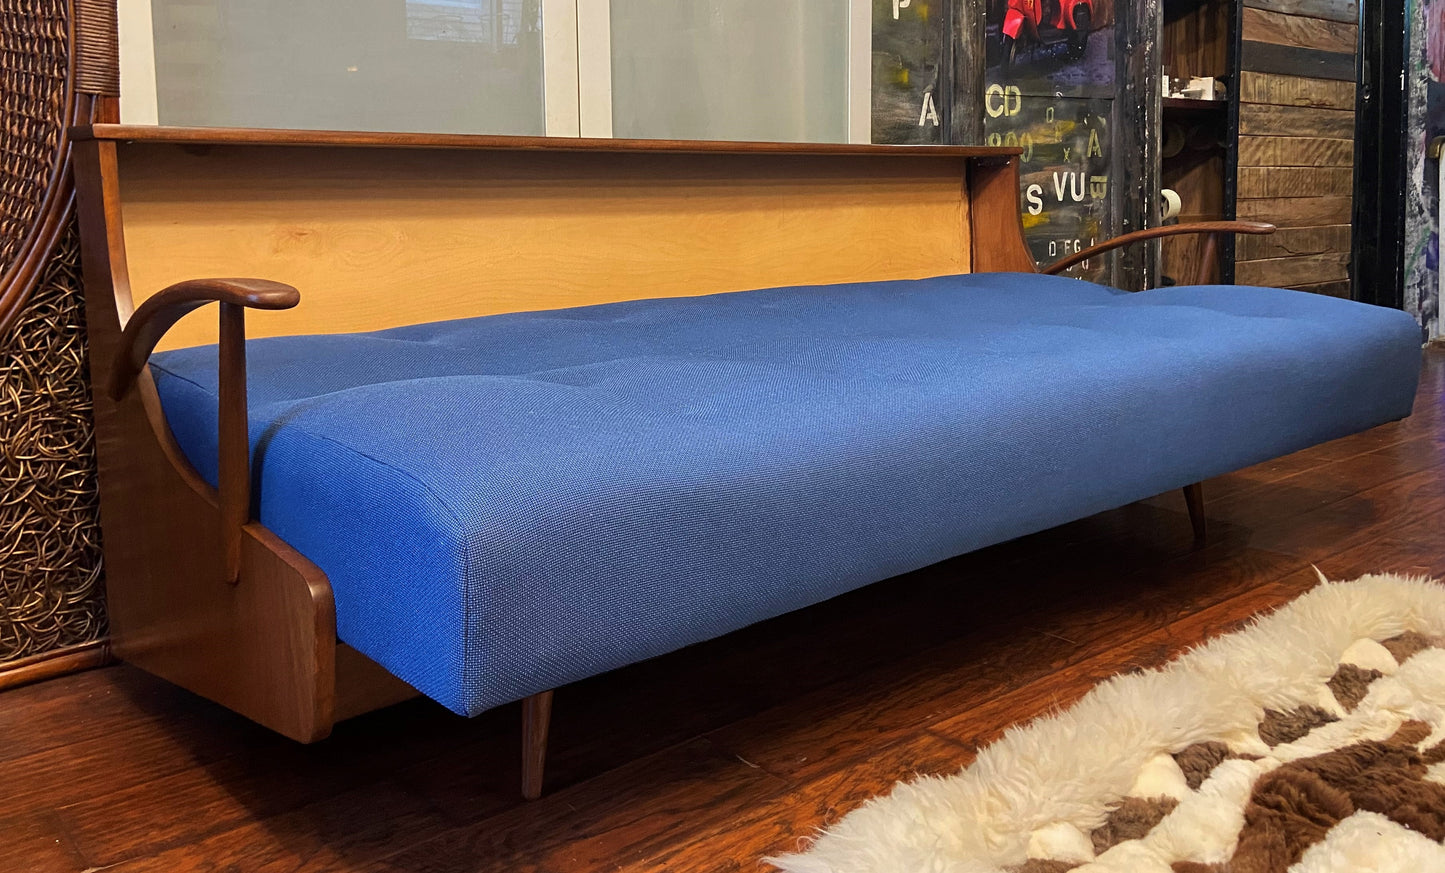 REFINISHED REUPHOLSTERED Mid Century Modern Folding Sofa - Bed